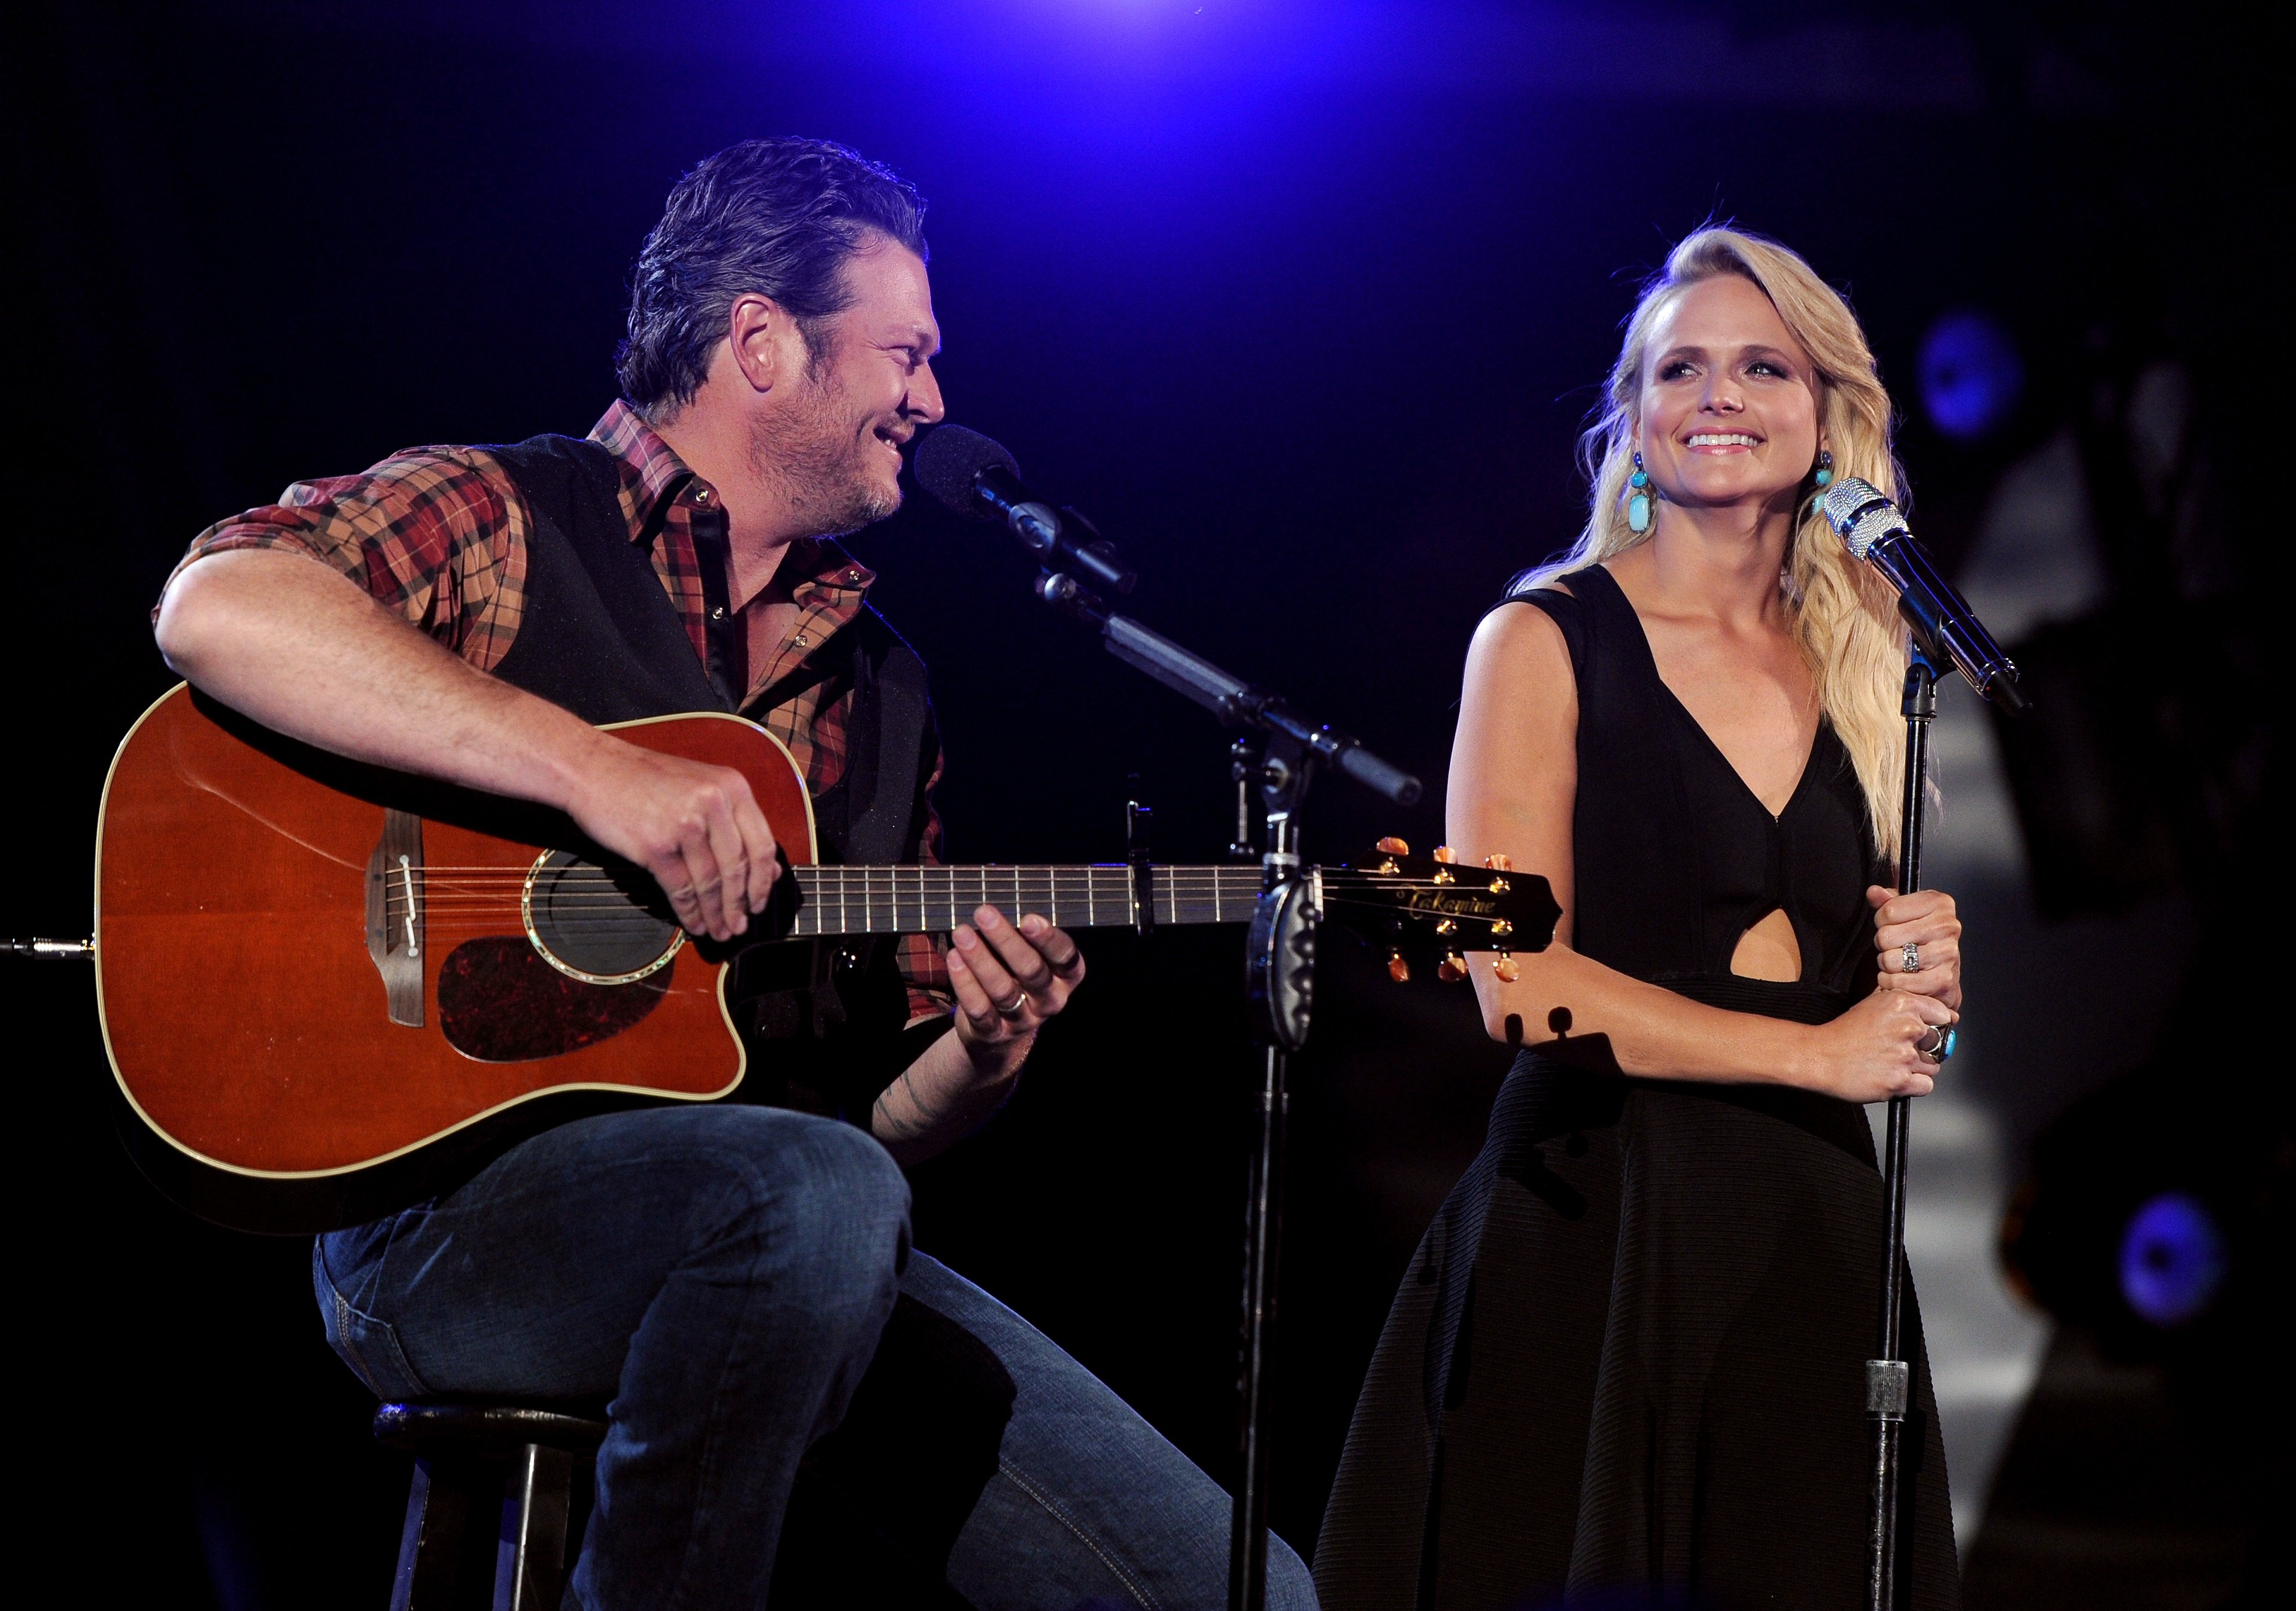 Blake Shelton and Miranda Lambert perform onstage during ACM Presents: An All-Star Salute To The Troops at the MGM Grand Garden Arena on April 7, 2014 in Las Vegas, Nevada | Source: Getty Images